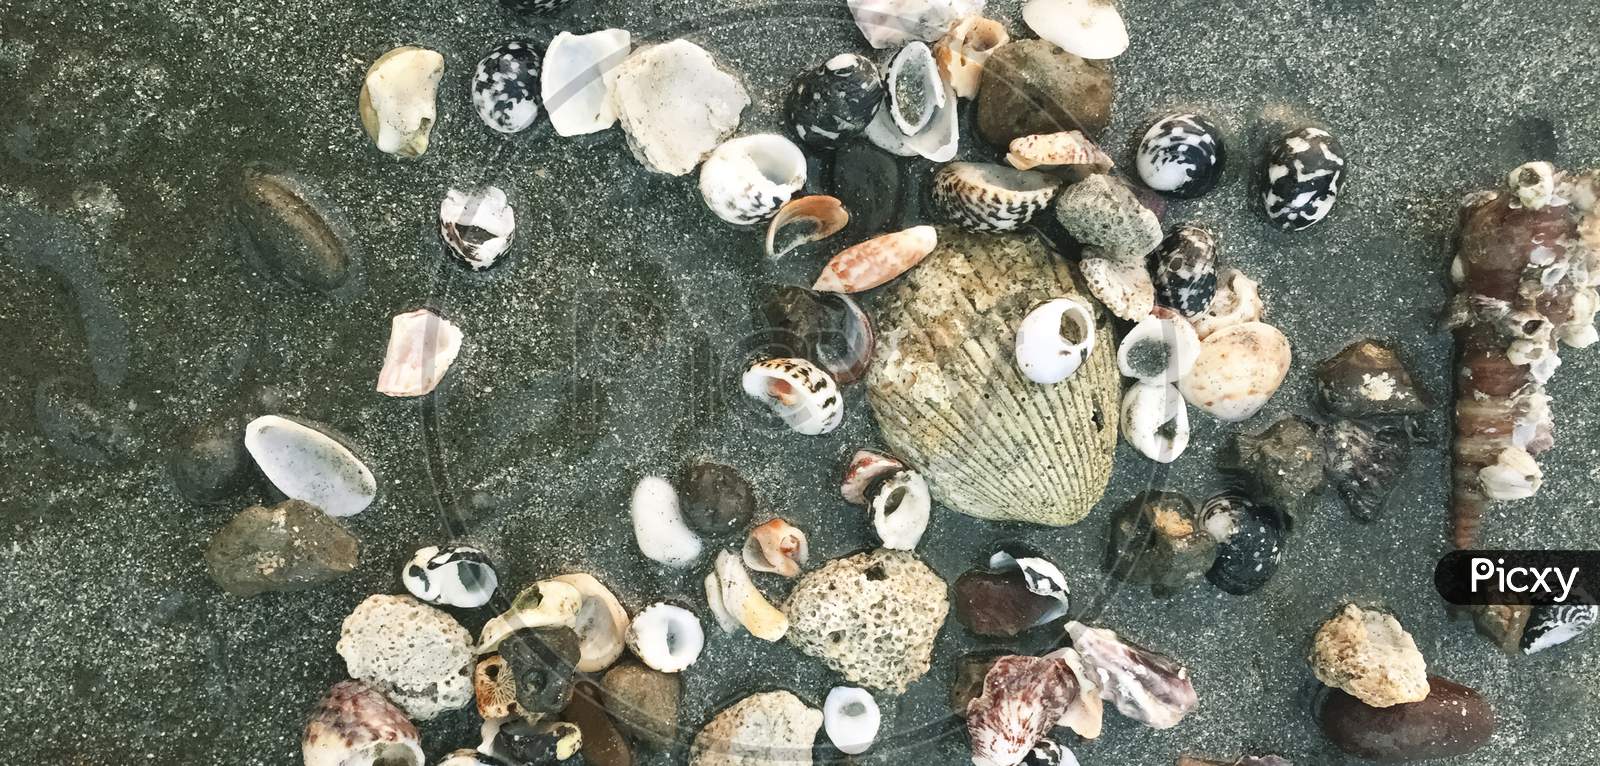 White And Colorful Sea Shells On Beach With Grey Sand.Clams On Beach Sand